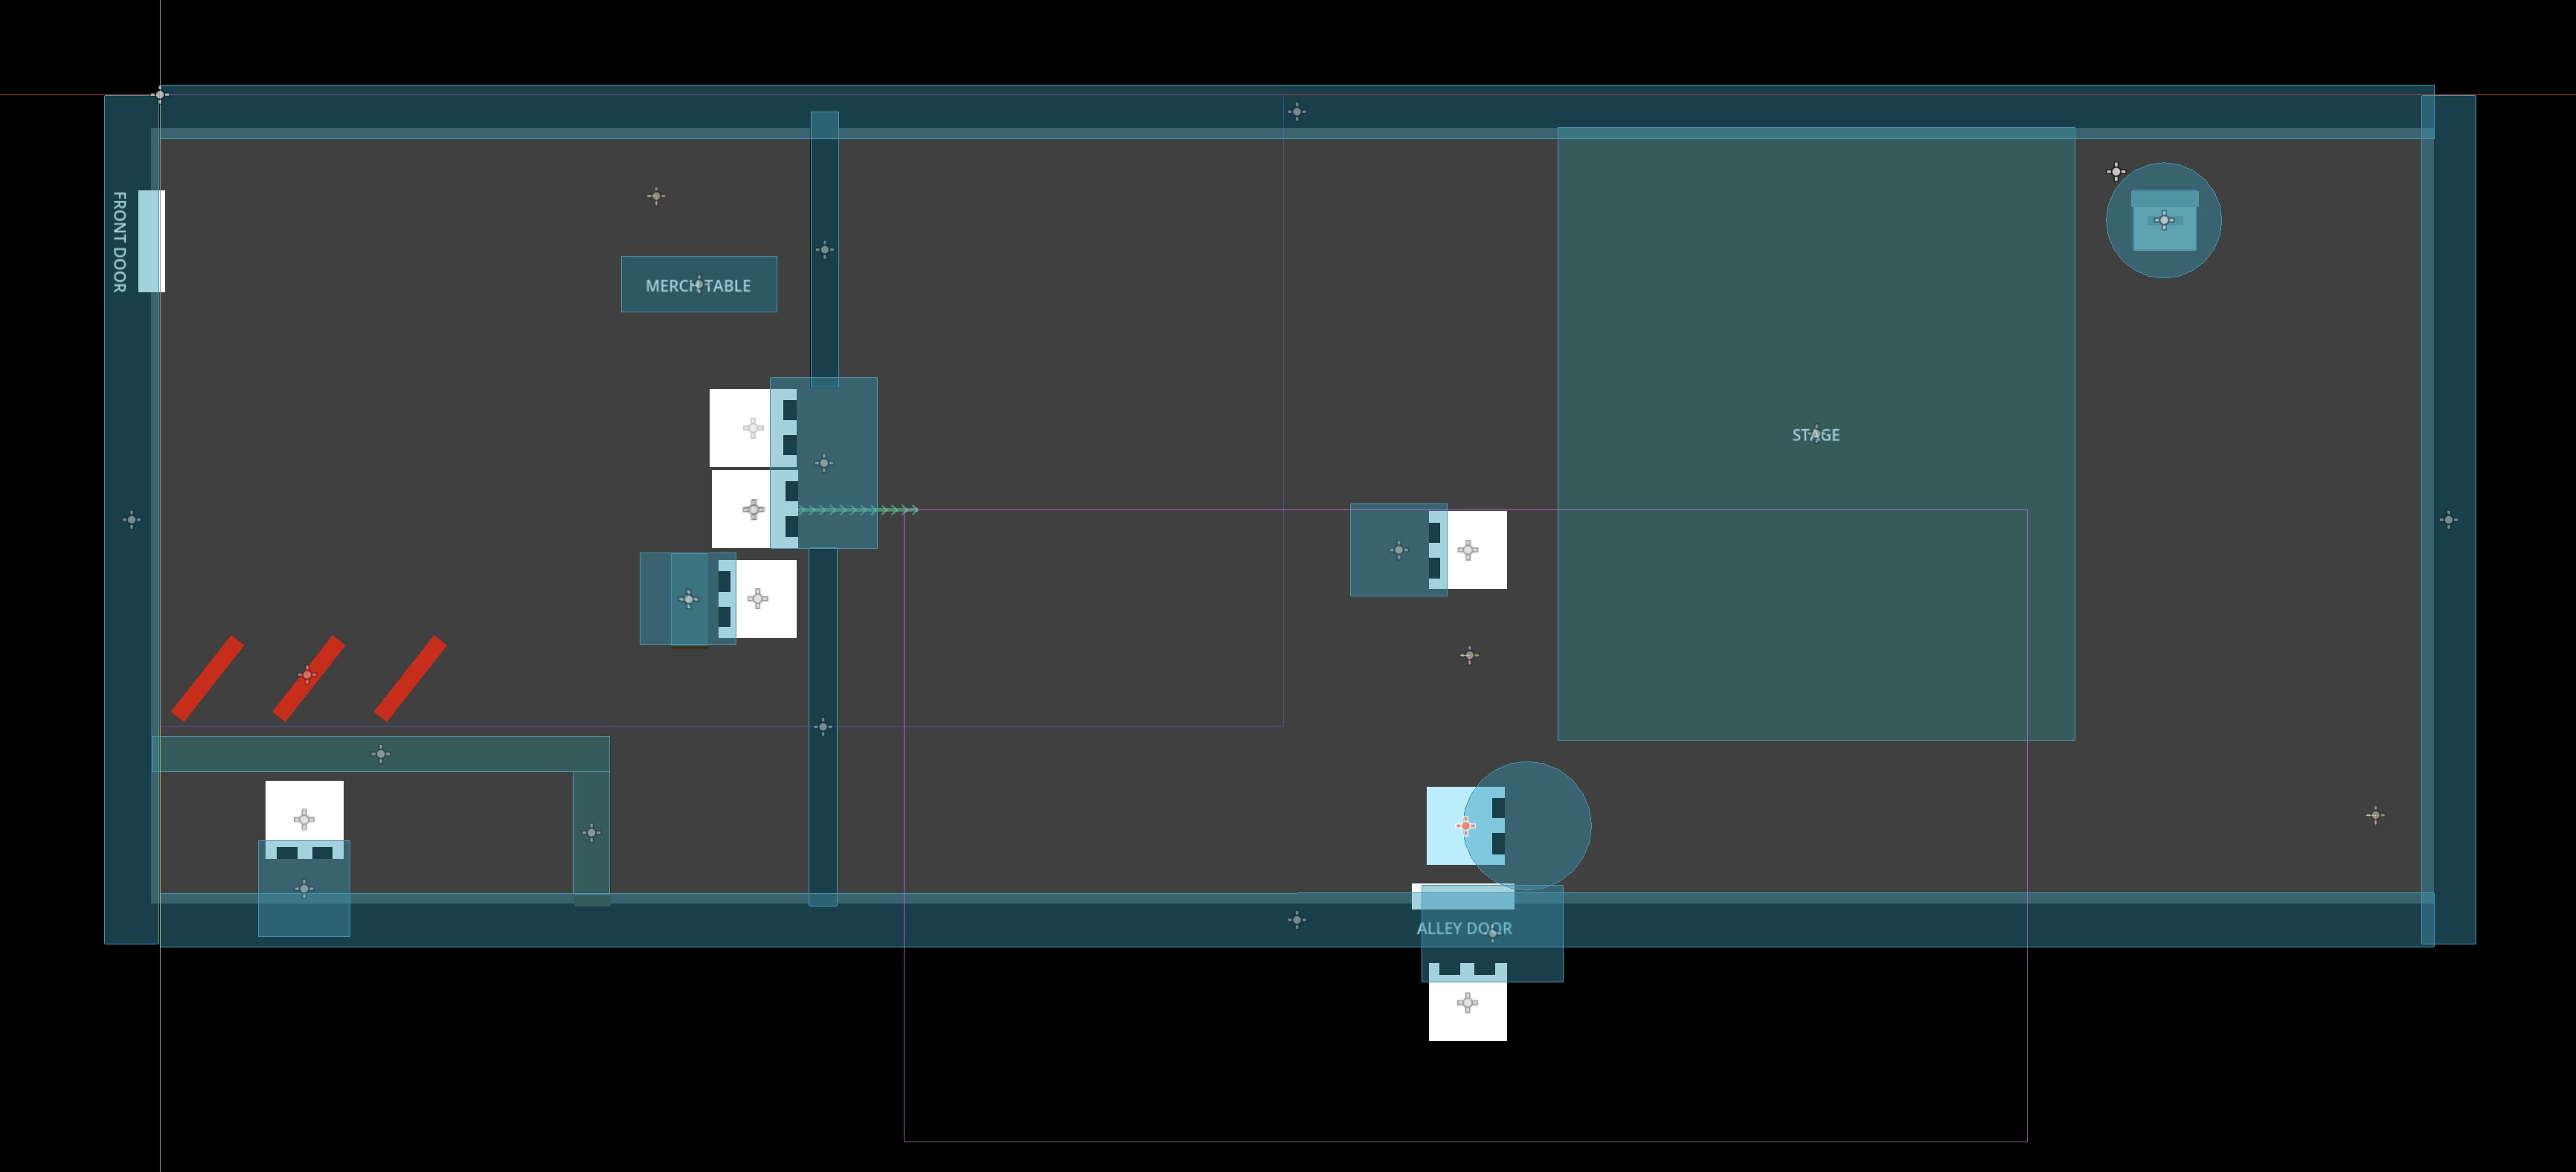 Editor layout of the venue with collision rectangles visible